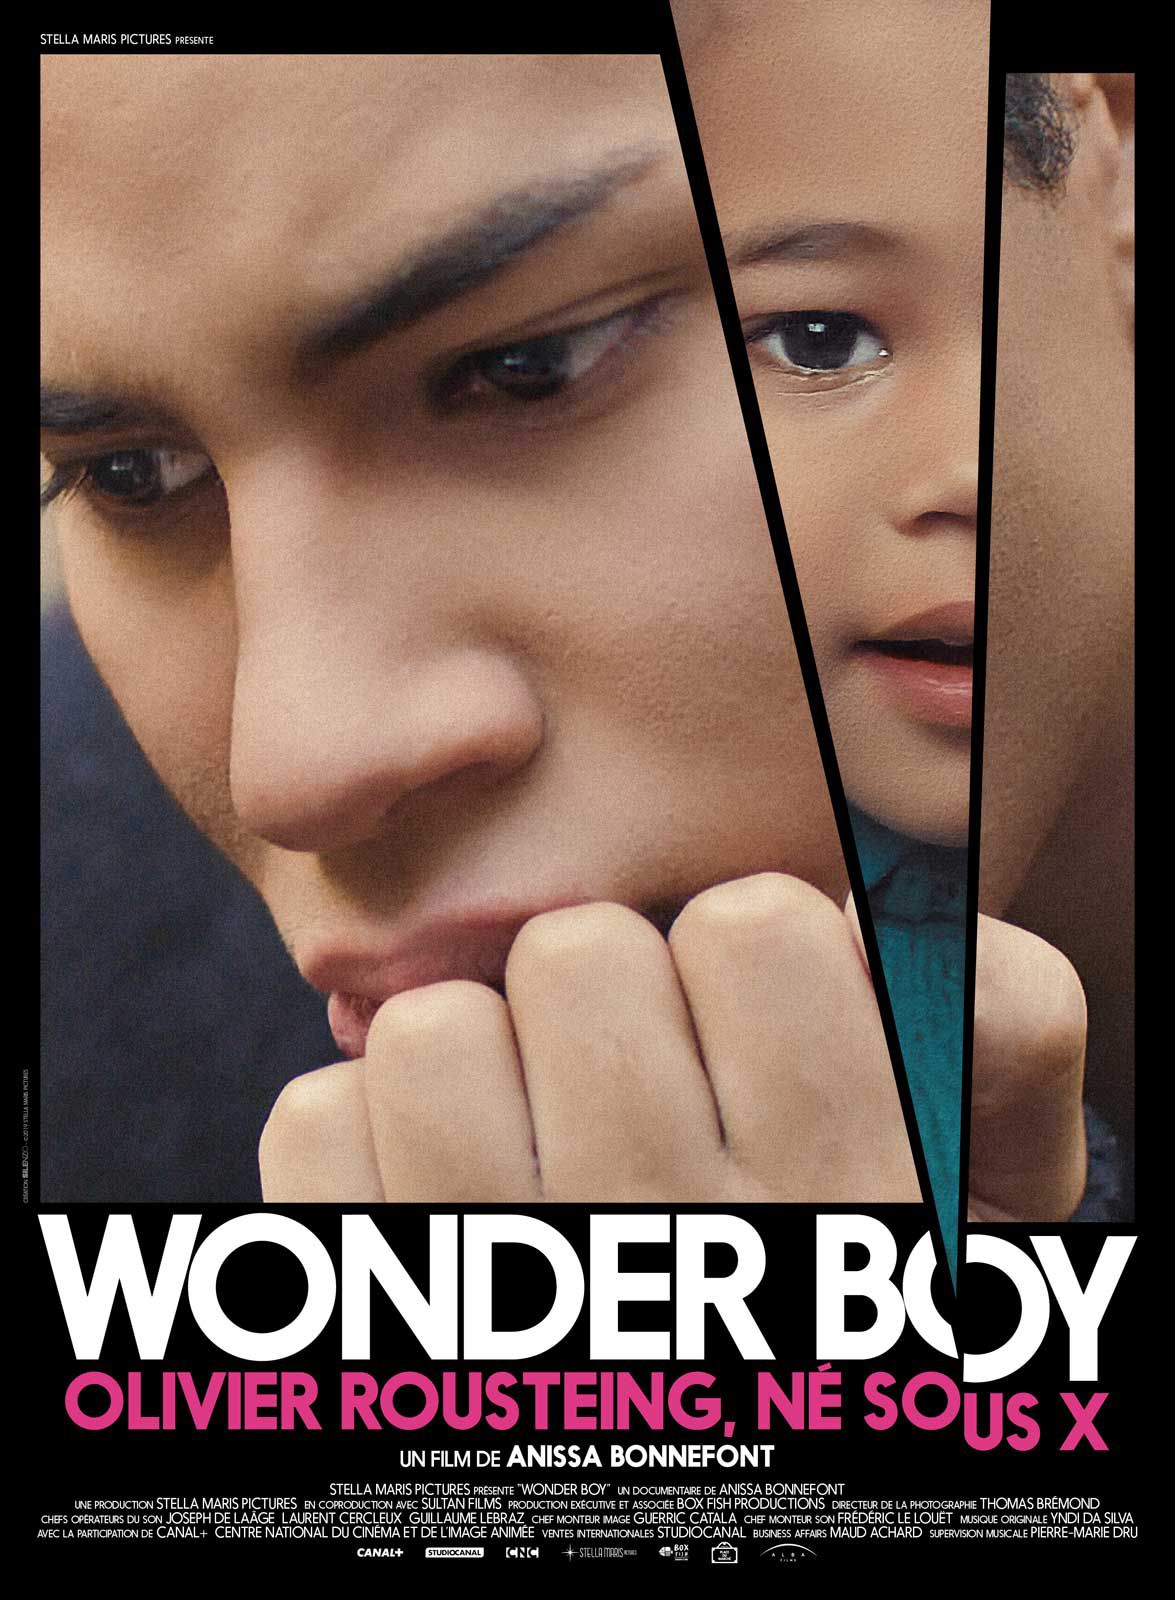 Wonder Boy, Olivier Rousteing, né sous X - Documentaire (2019) streaming VF gratuit complet